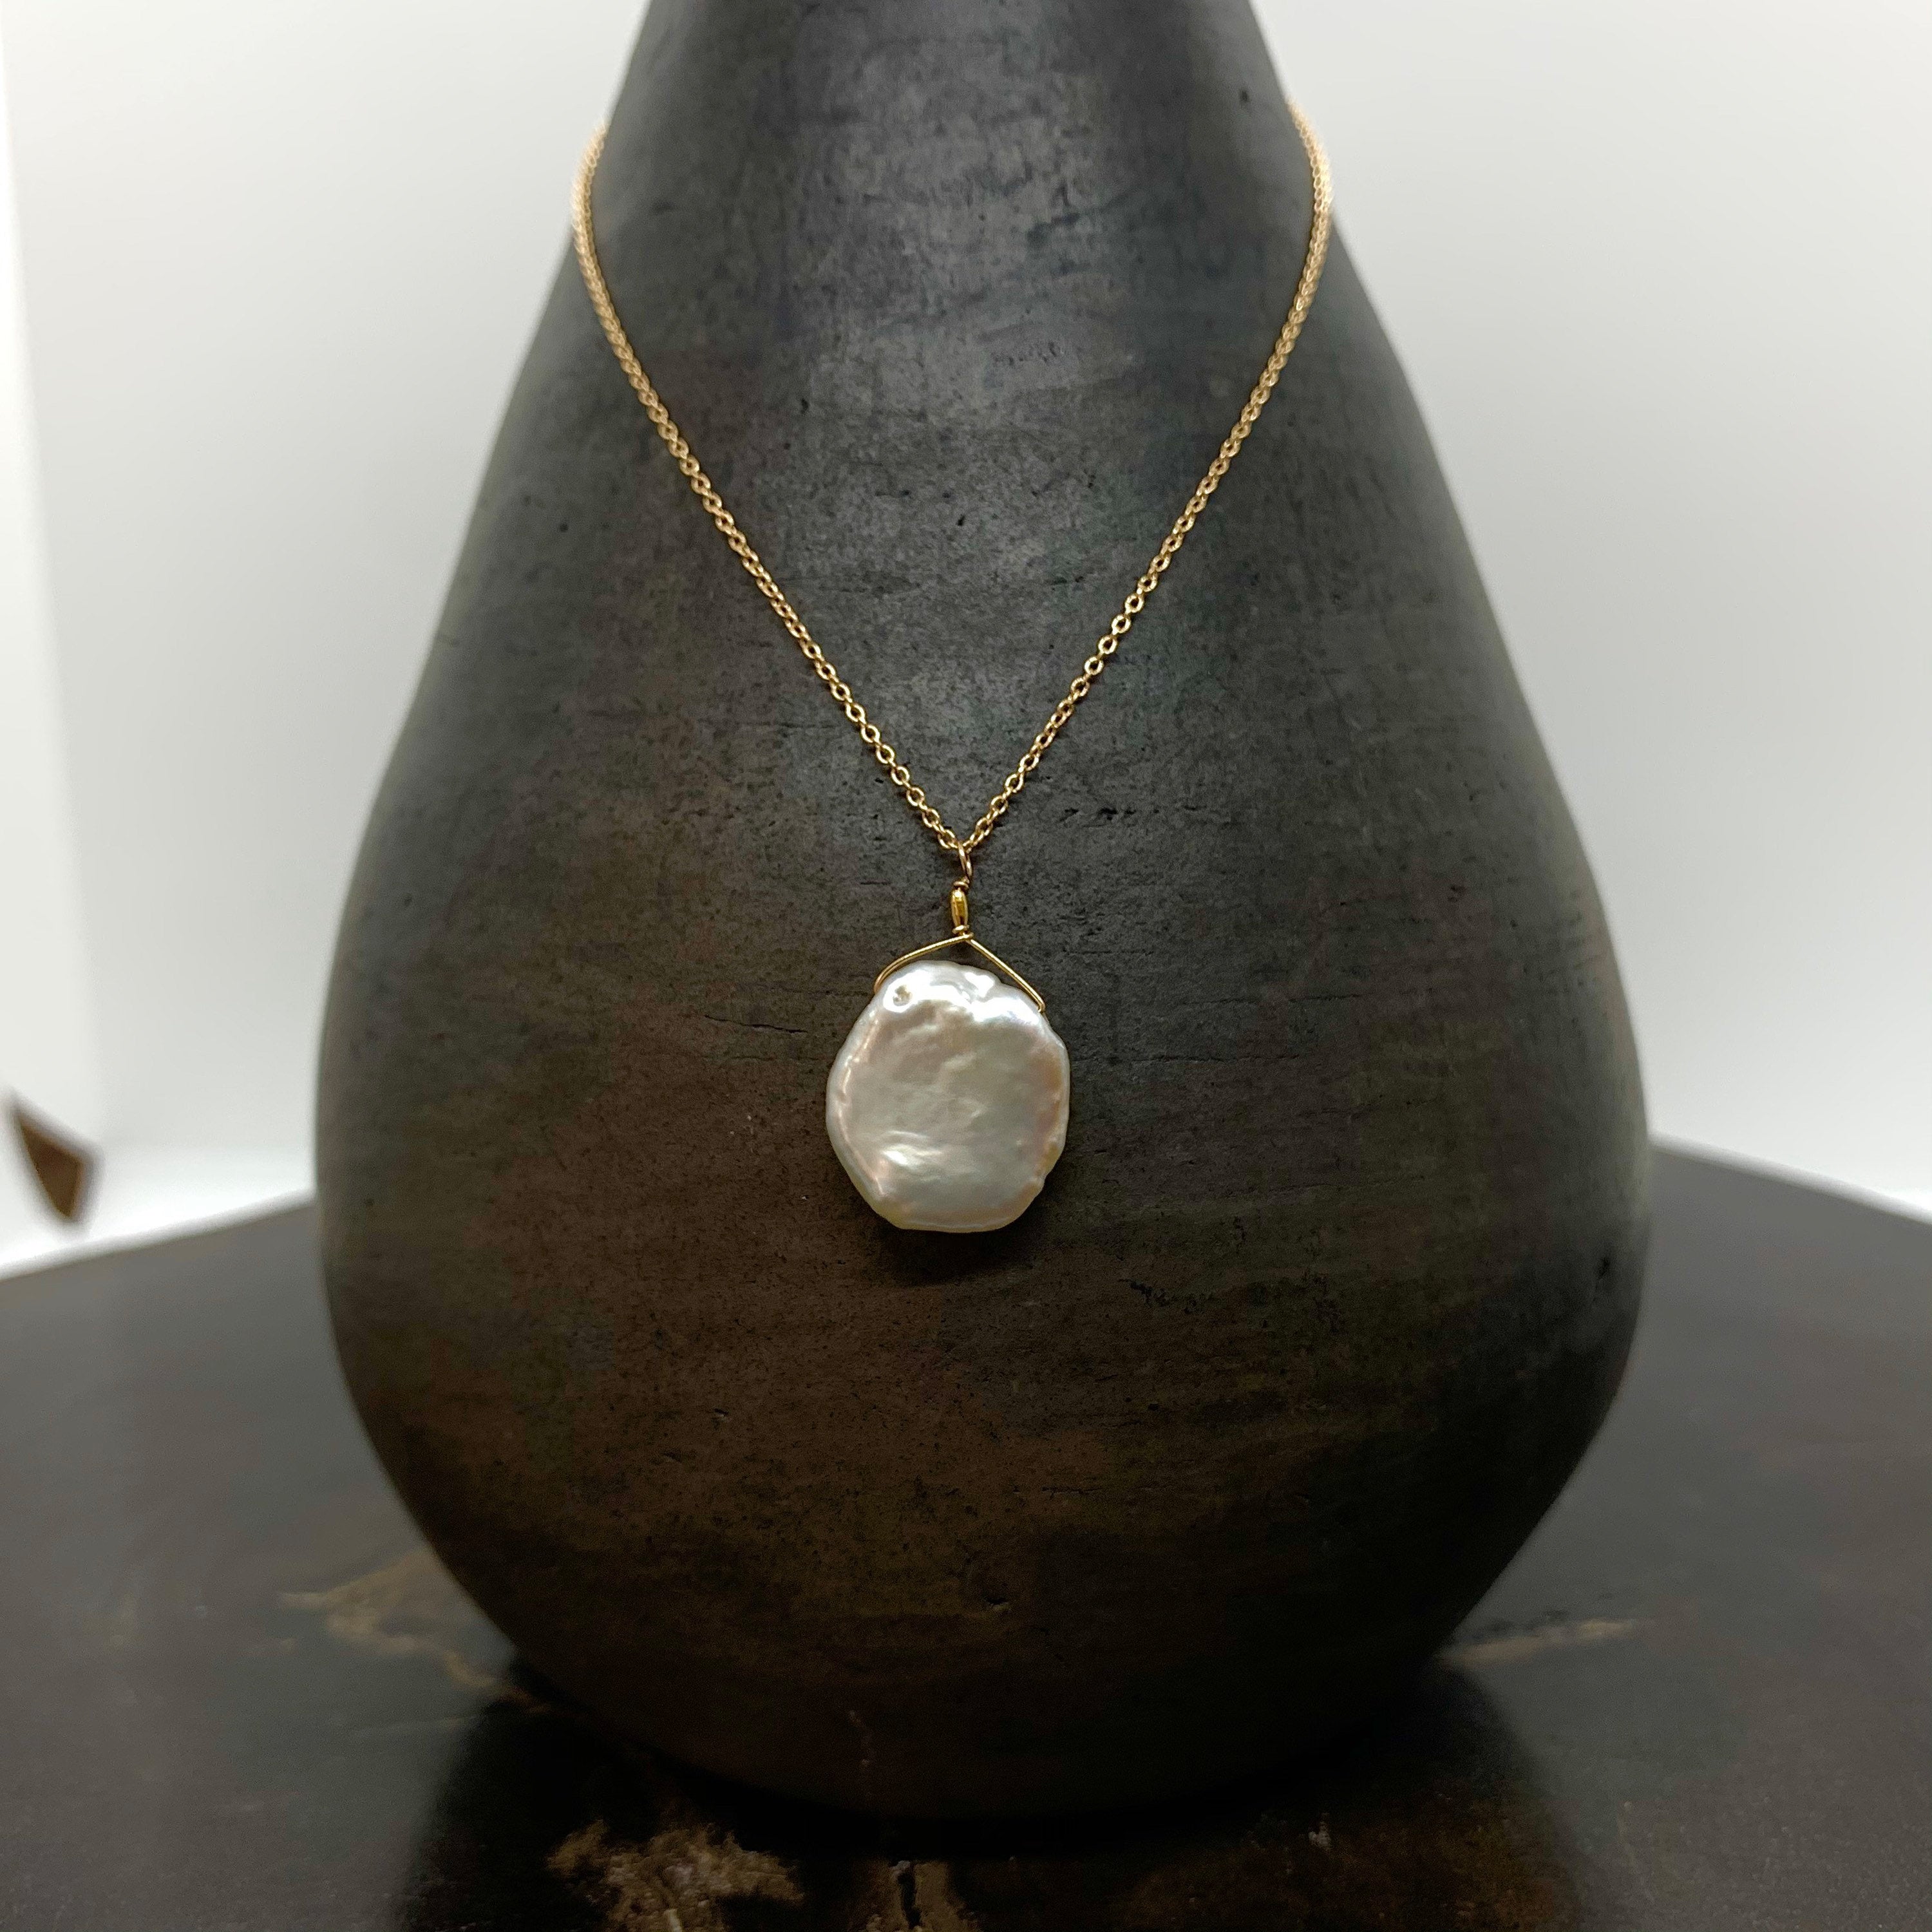 14k Gold Chain Necklace w/ Keshi Pearl & 18k Gold Nugget